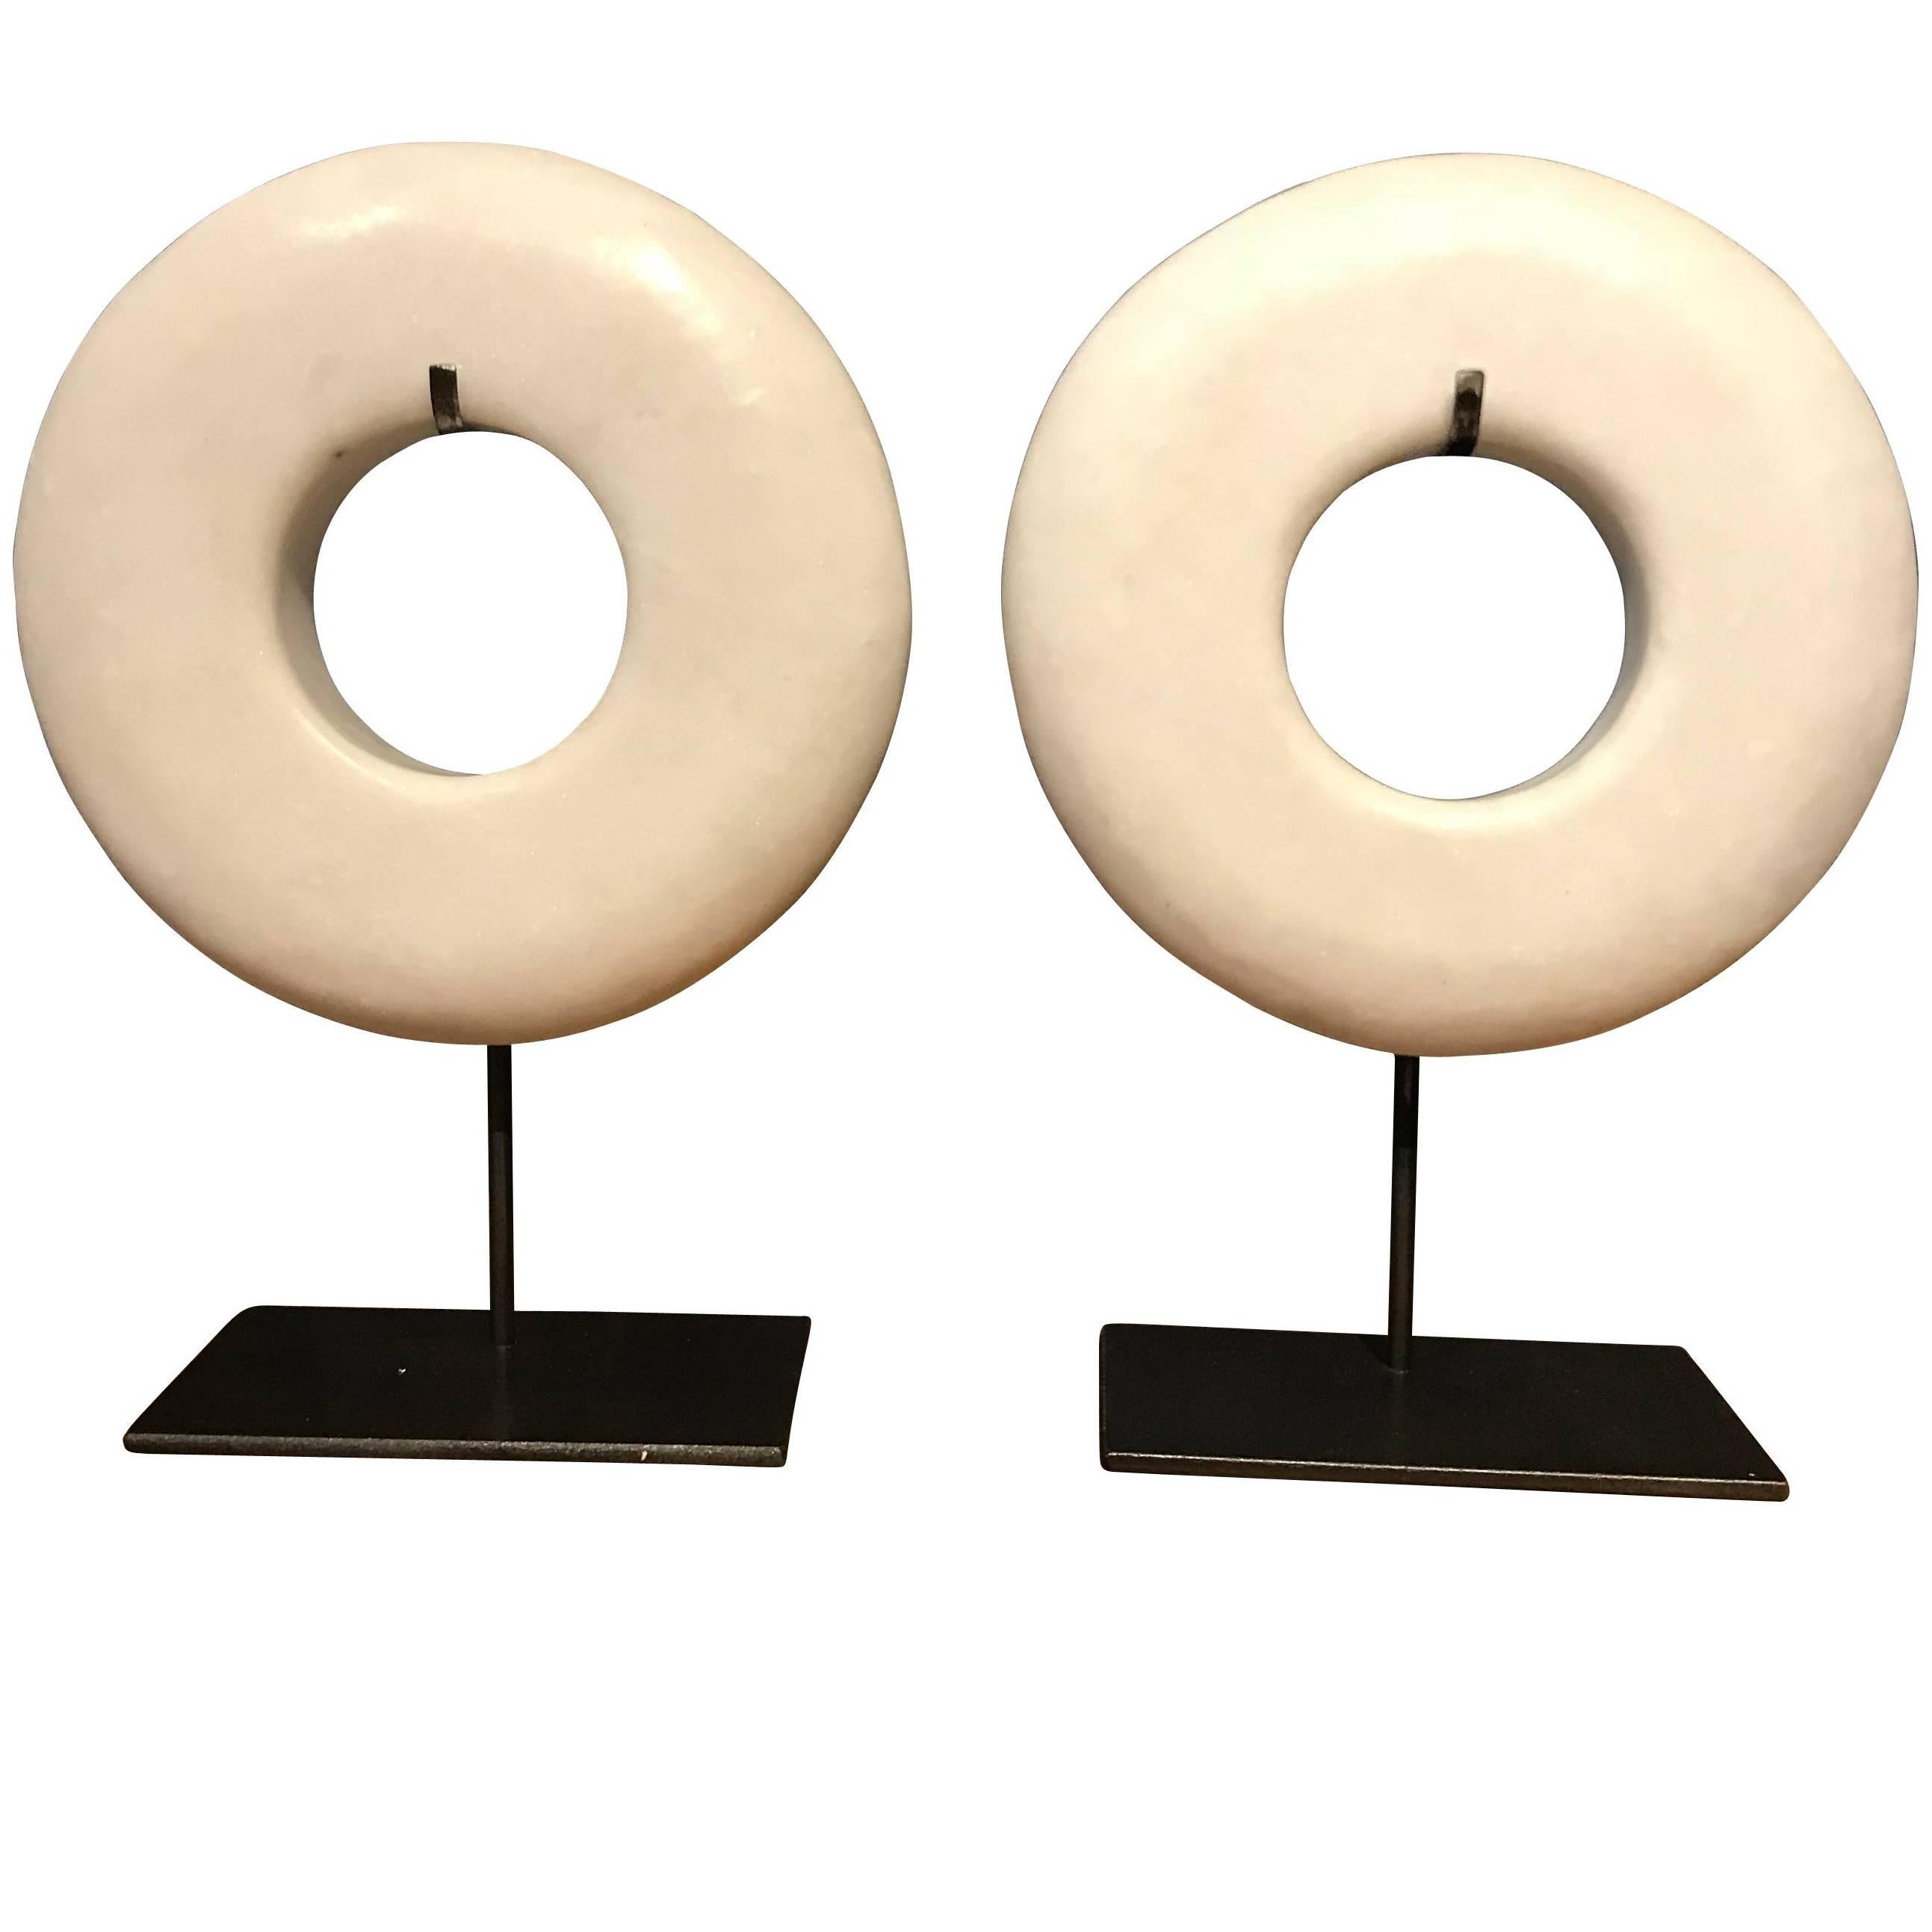 Pair of White Thick Ring Sculptures, China, Contemporary